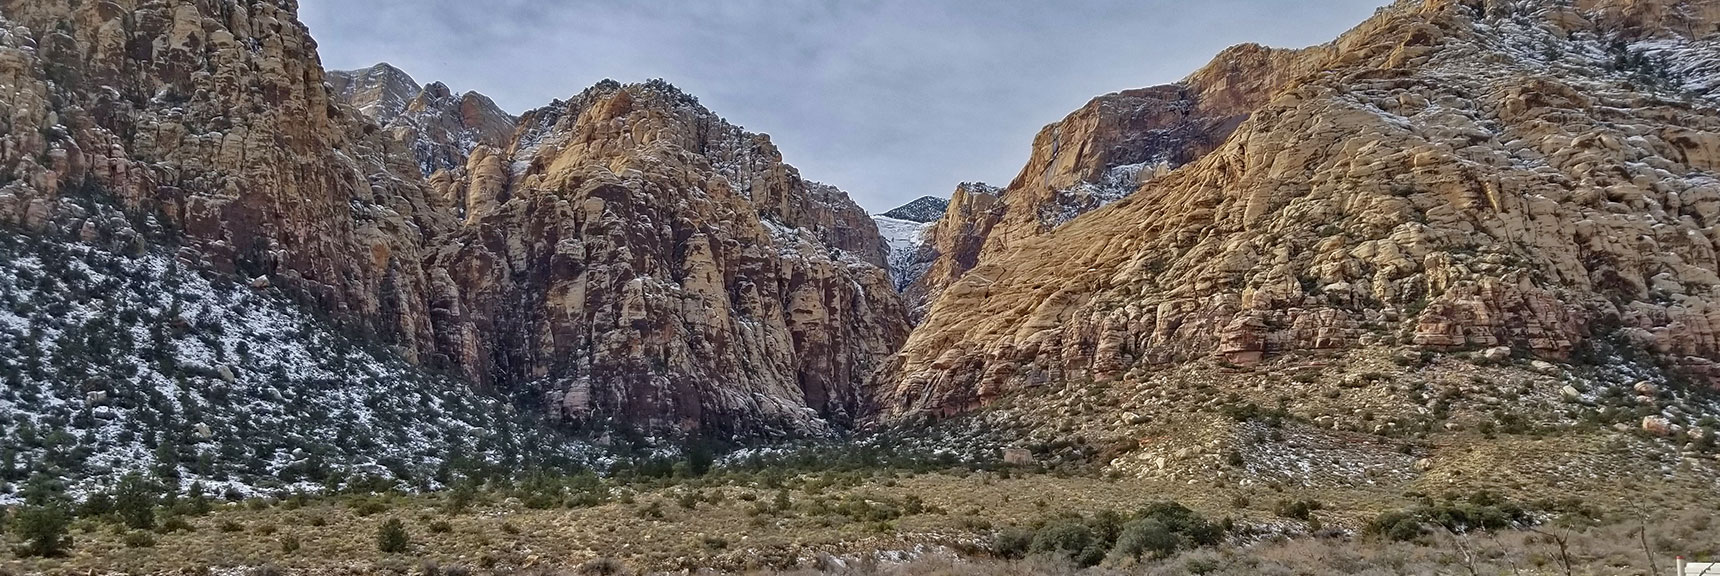 Red Rock National Park View of Ice Box Canyon from Scenic Drive